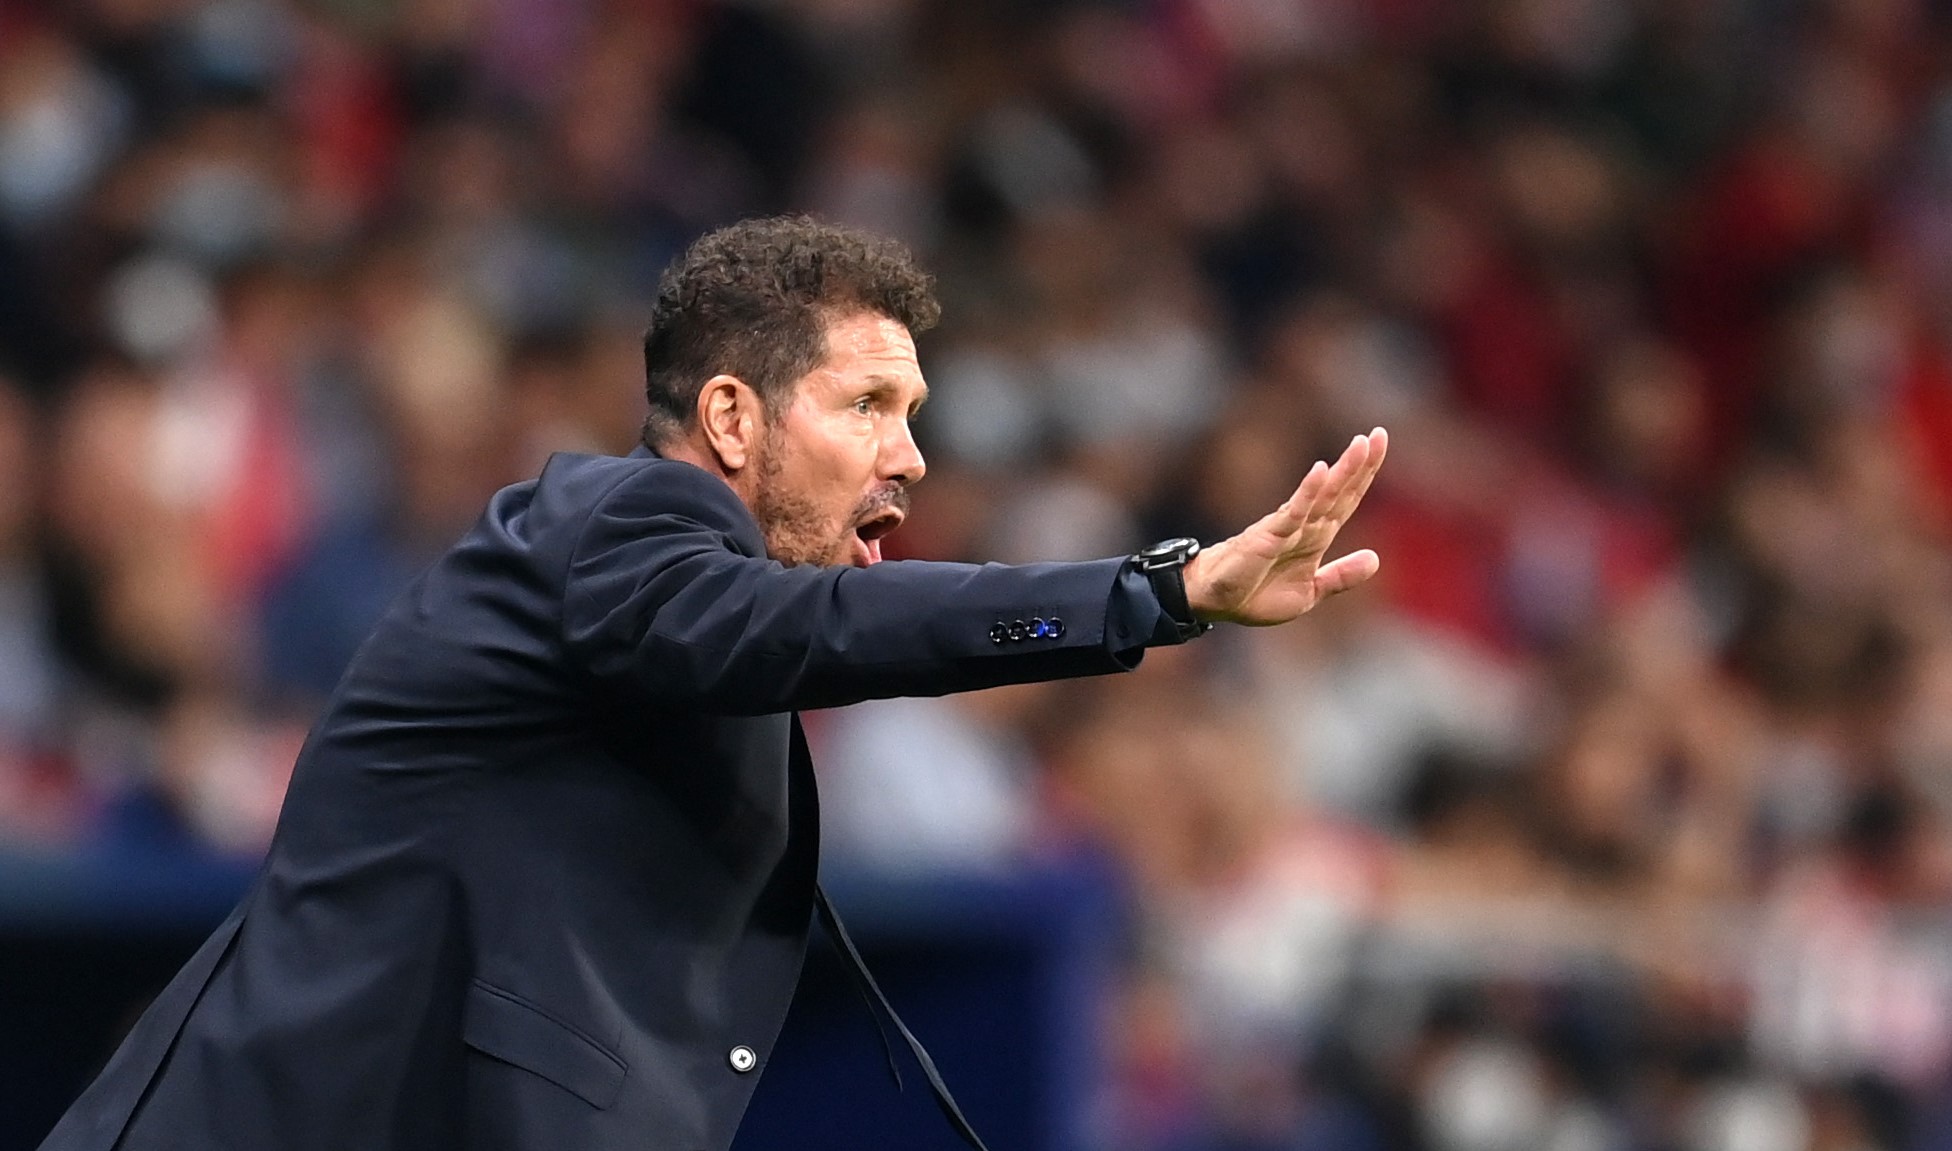 Diego Simeone unhappy with one aspect of Atletico Madrid’s play after Real Sociedad draw